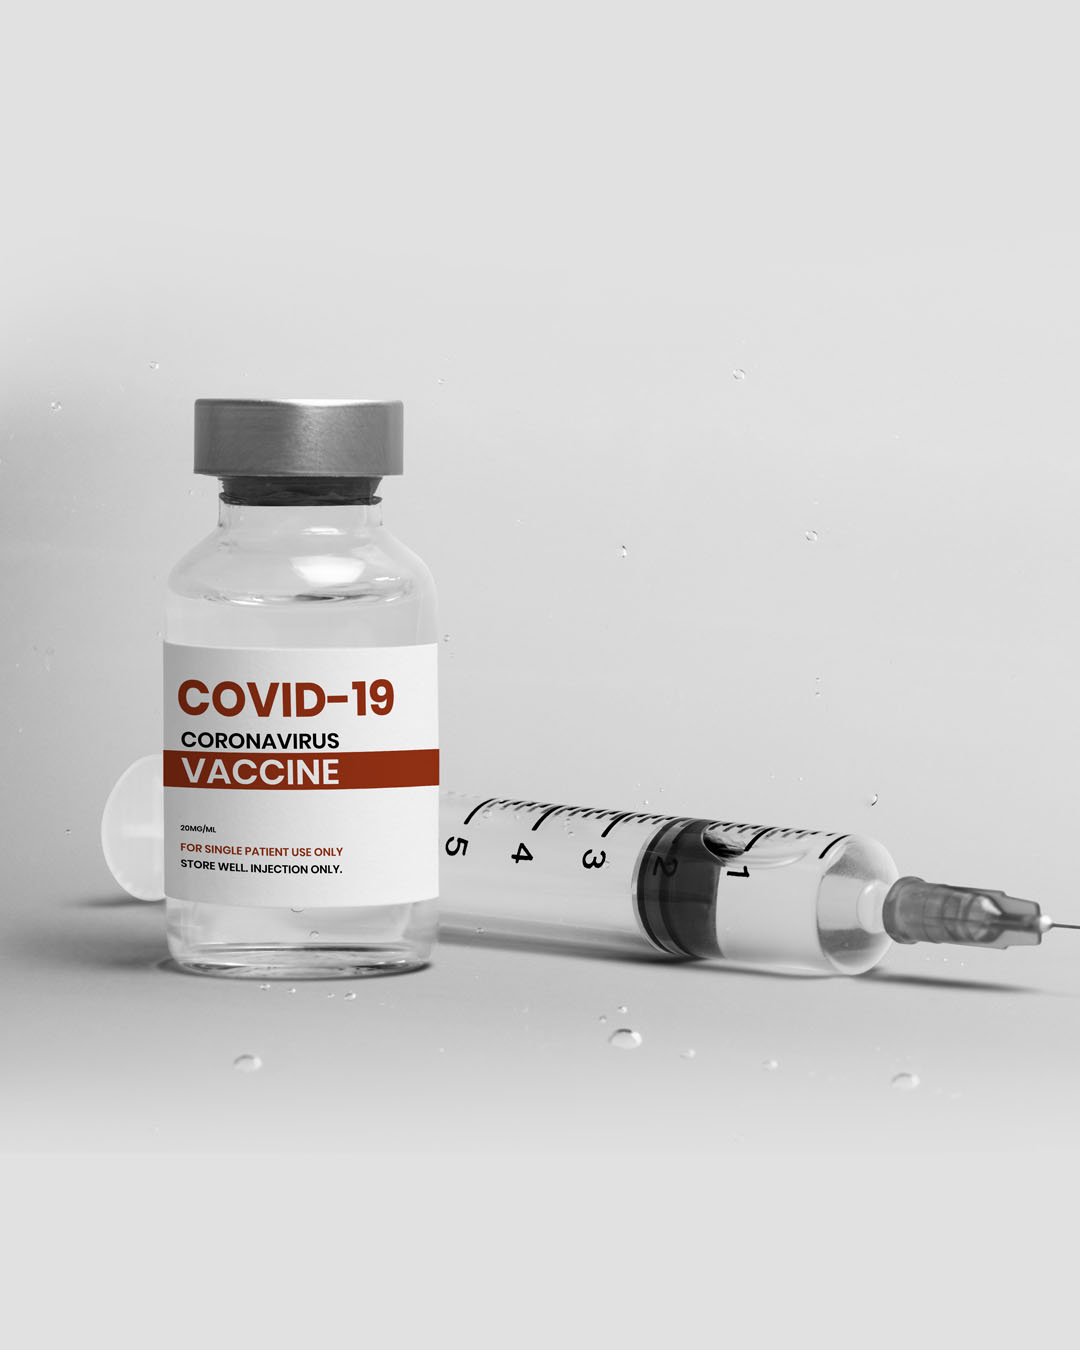 Moderna to begin Phase 3 of COVID-19 vaccine study in July